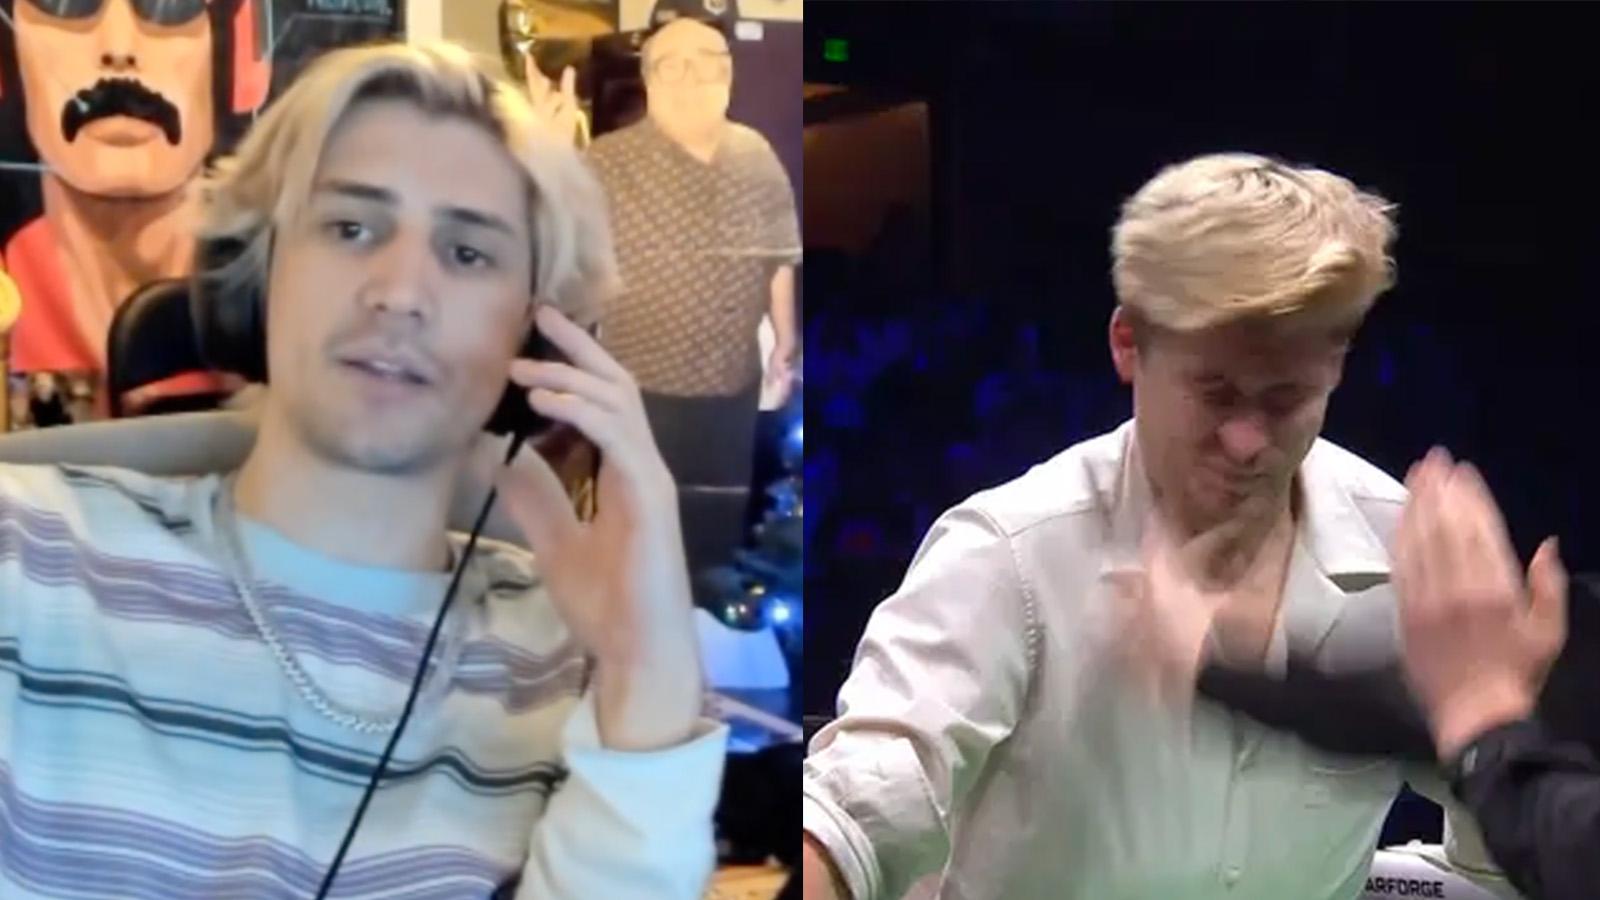 xQc on stream next to Ludwig getting slapped